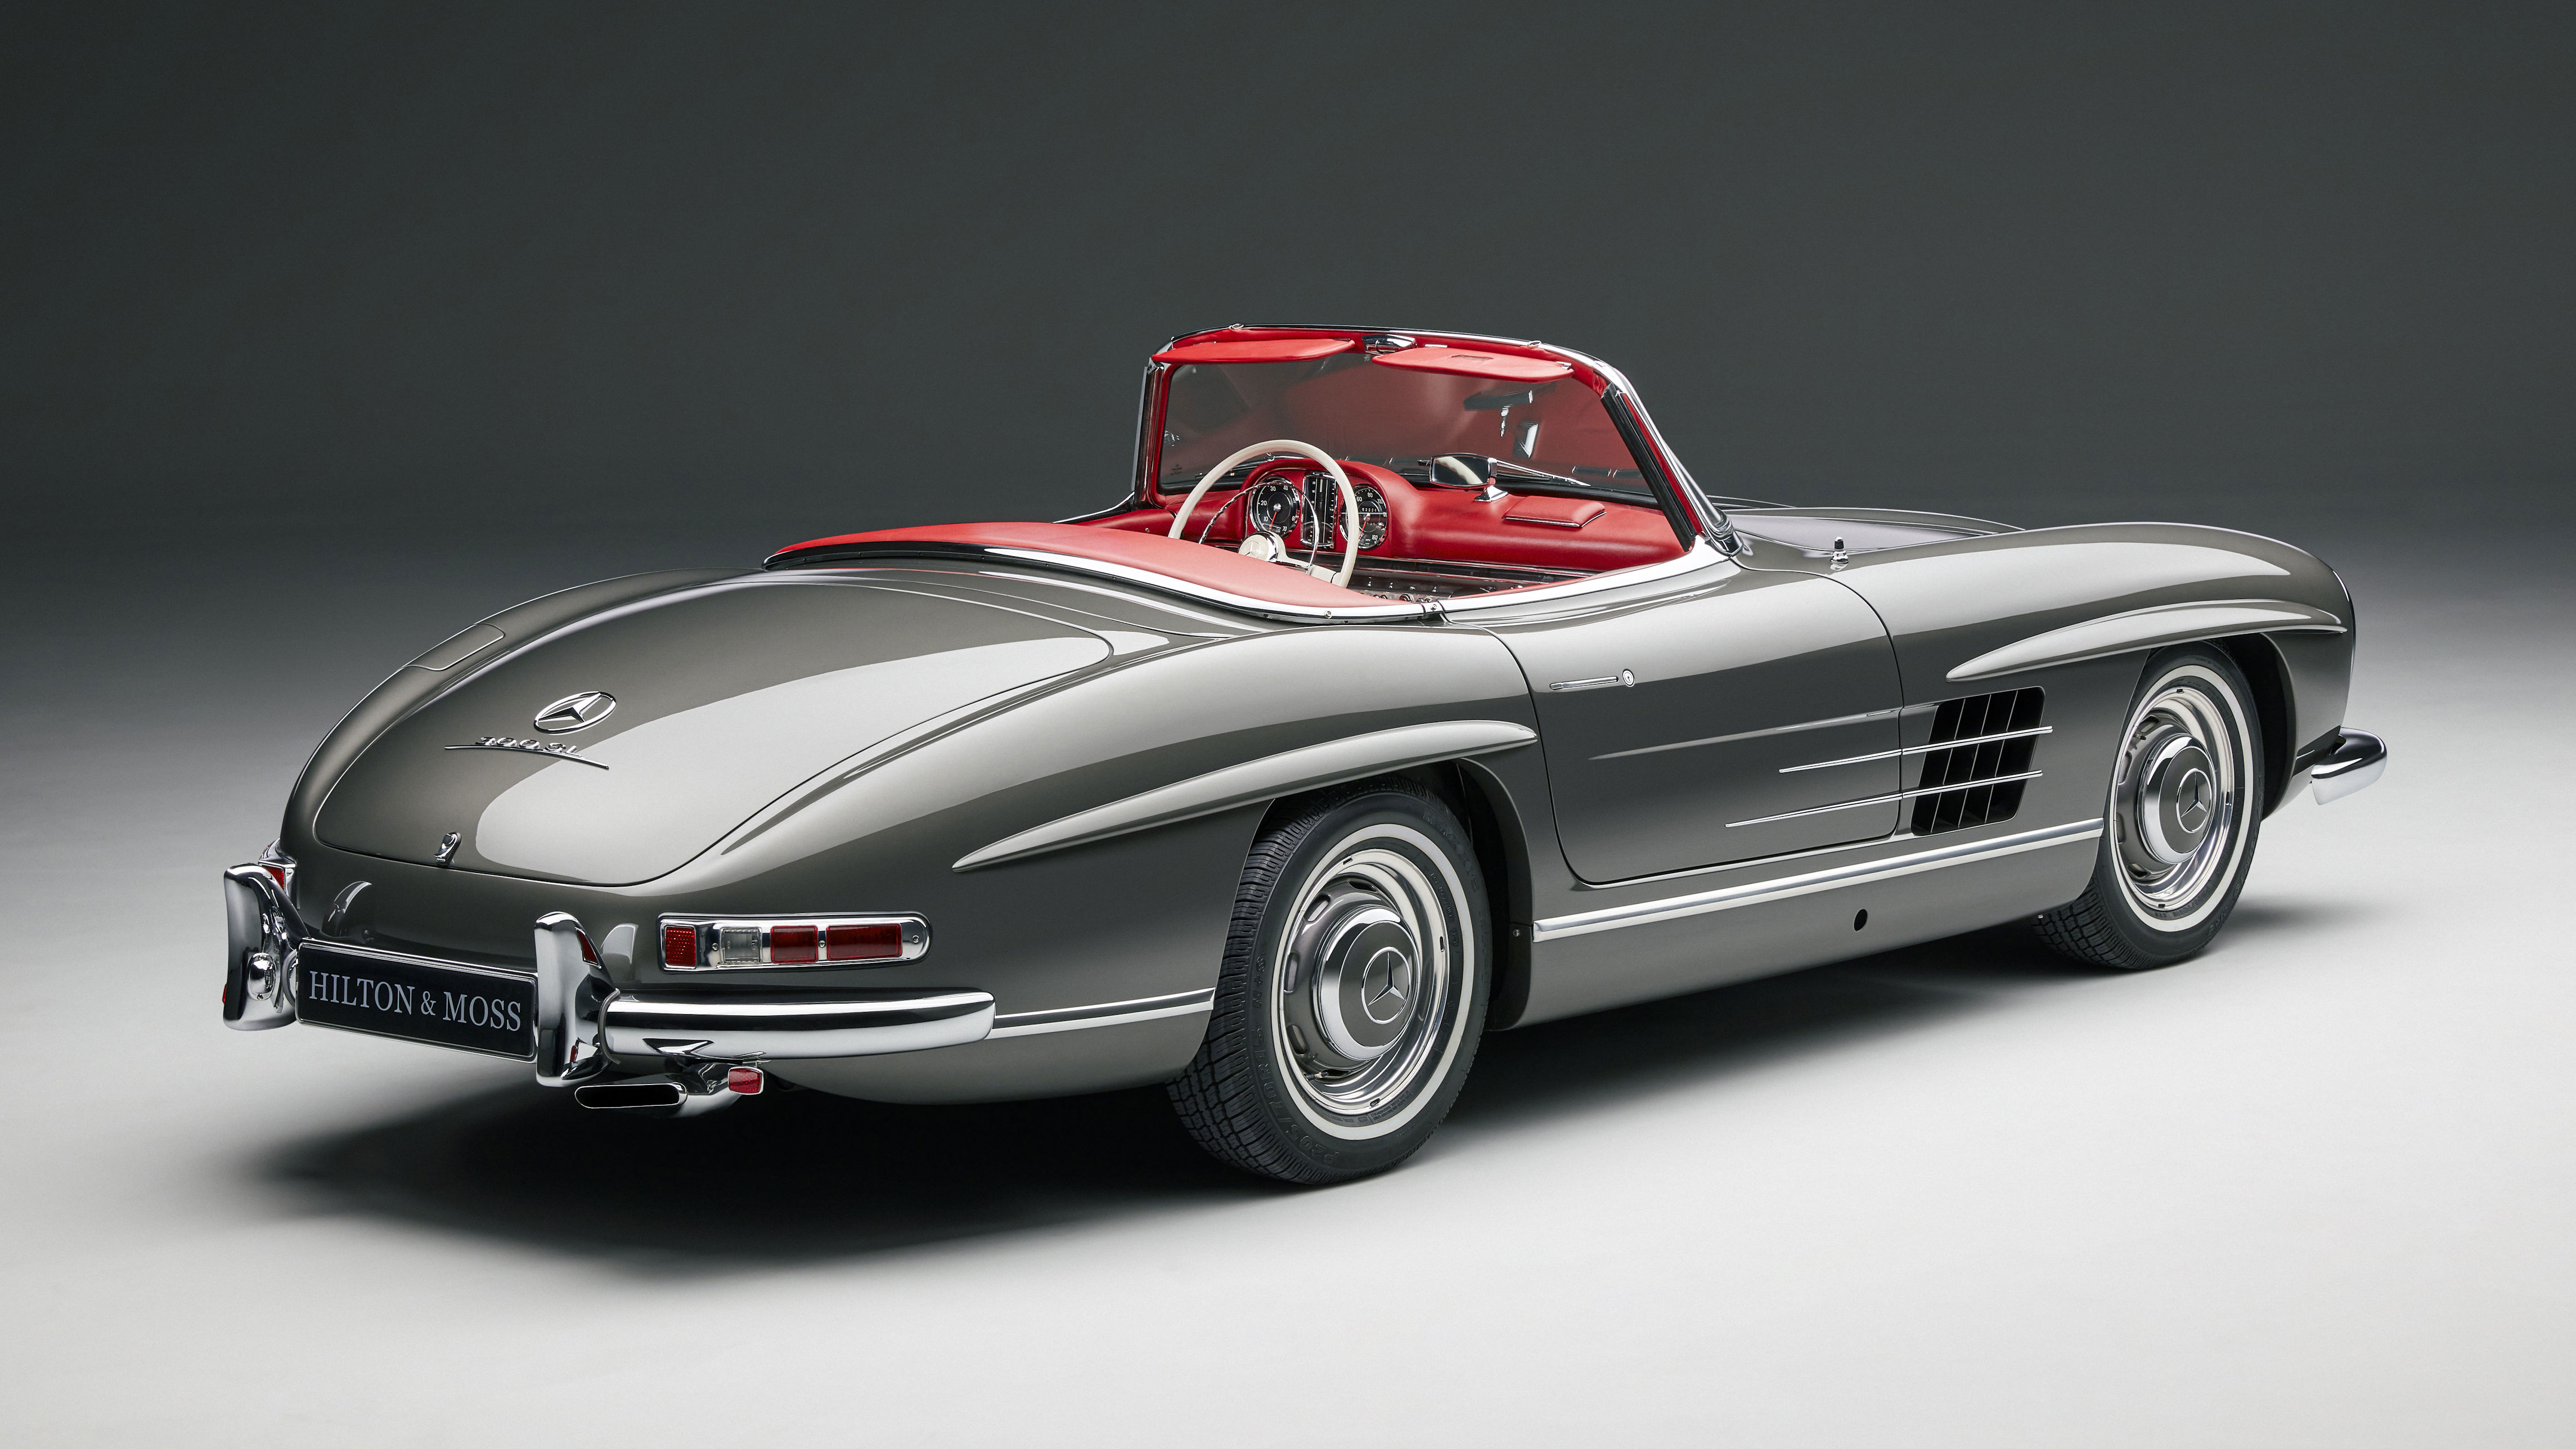 just look at this glorious, fully restored mercedes-benz 300sl roadster